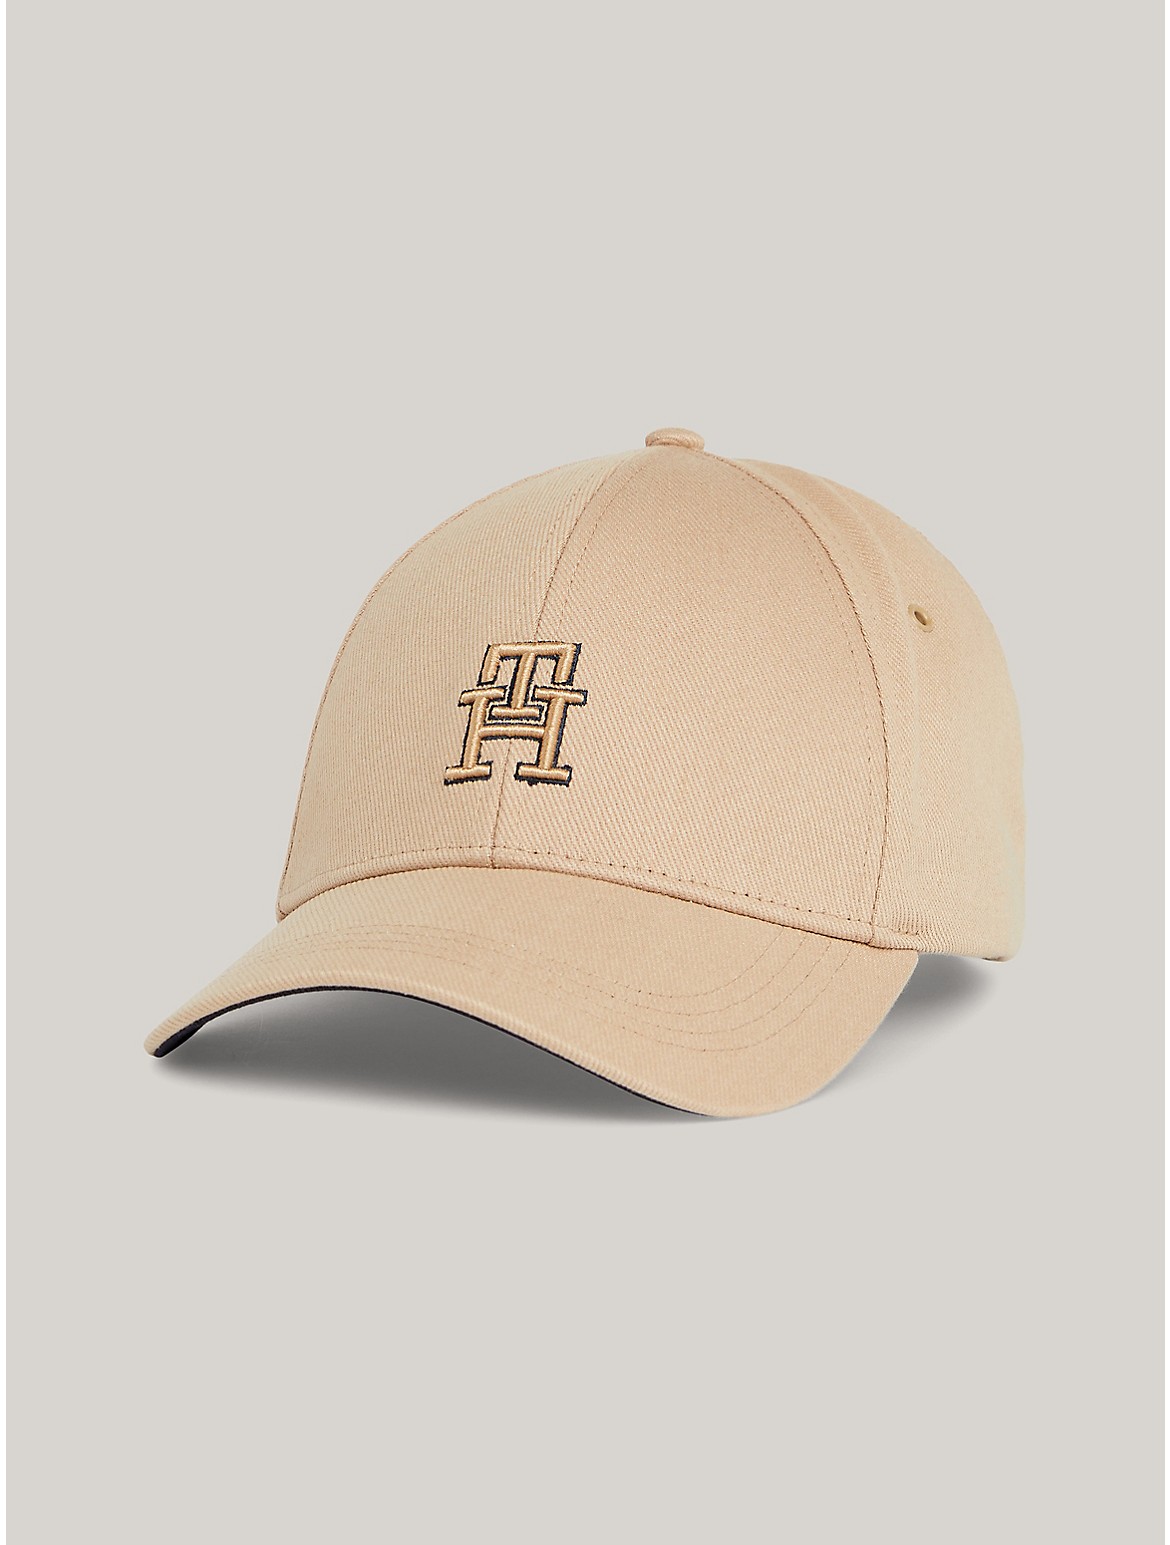 Tommy Hilfiger Men's Embroidered TH Logo Twill Cap